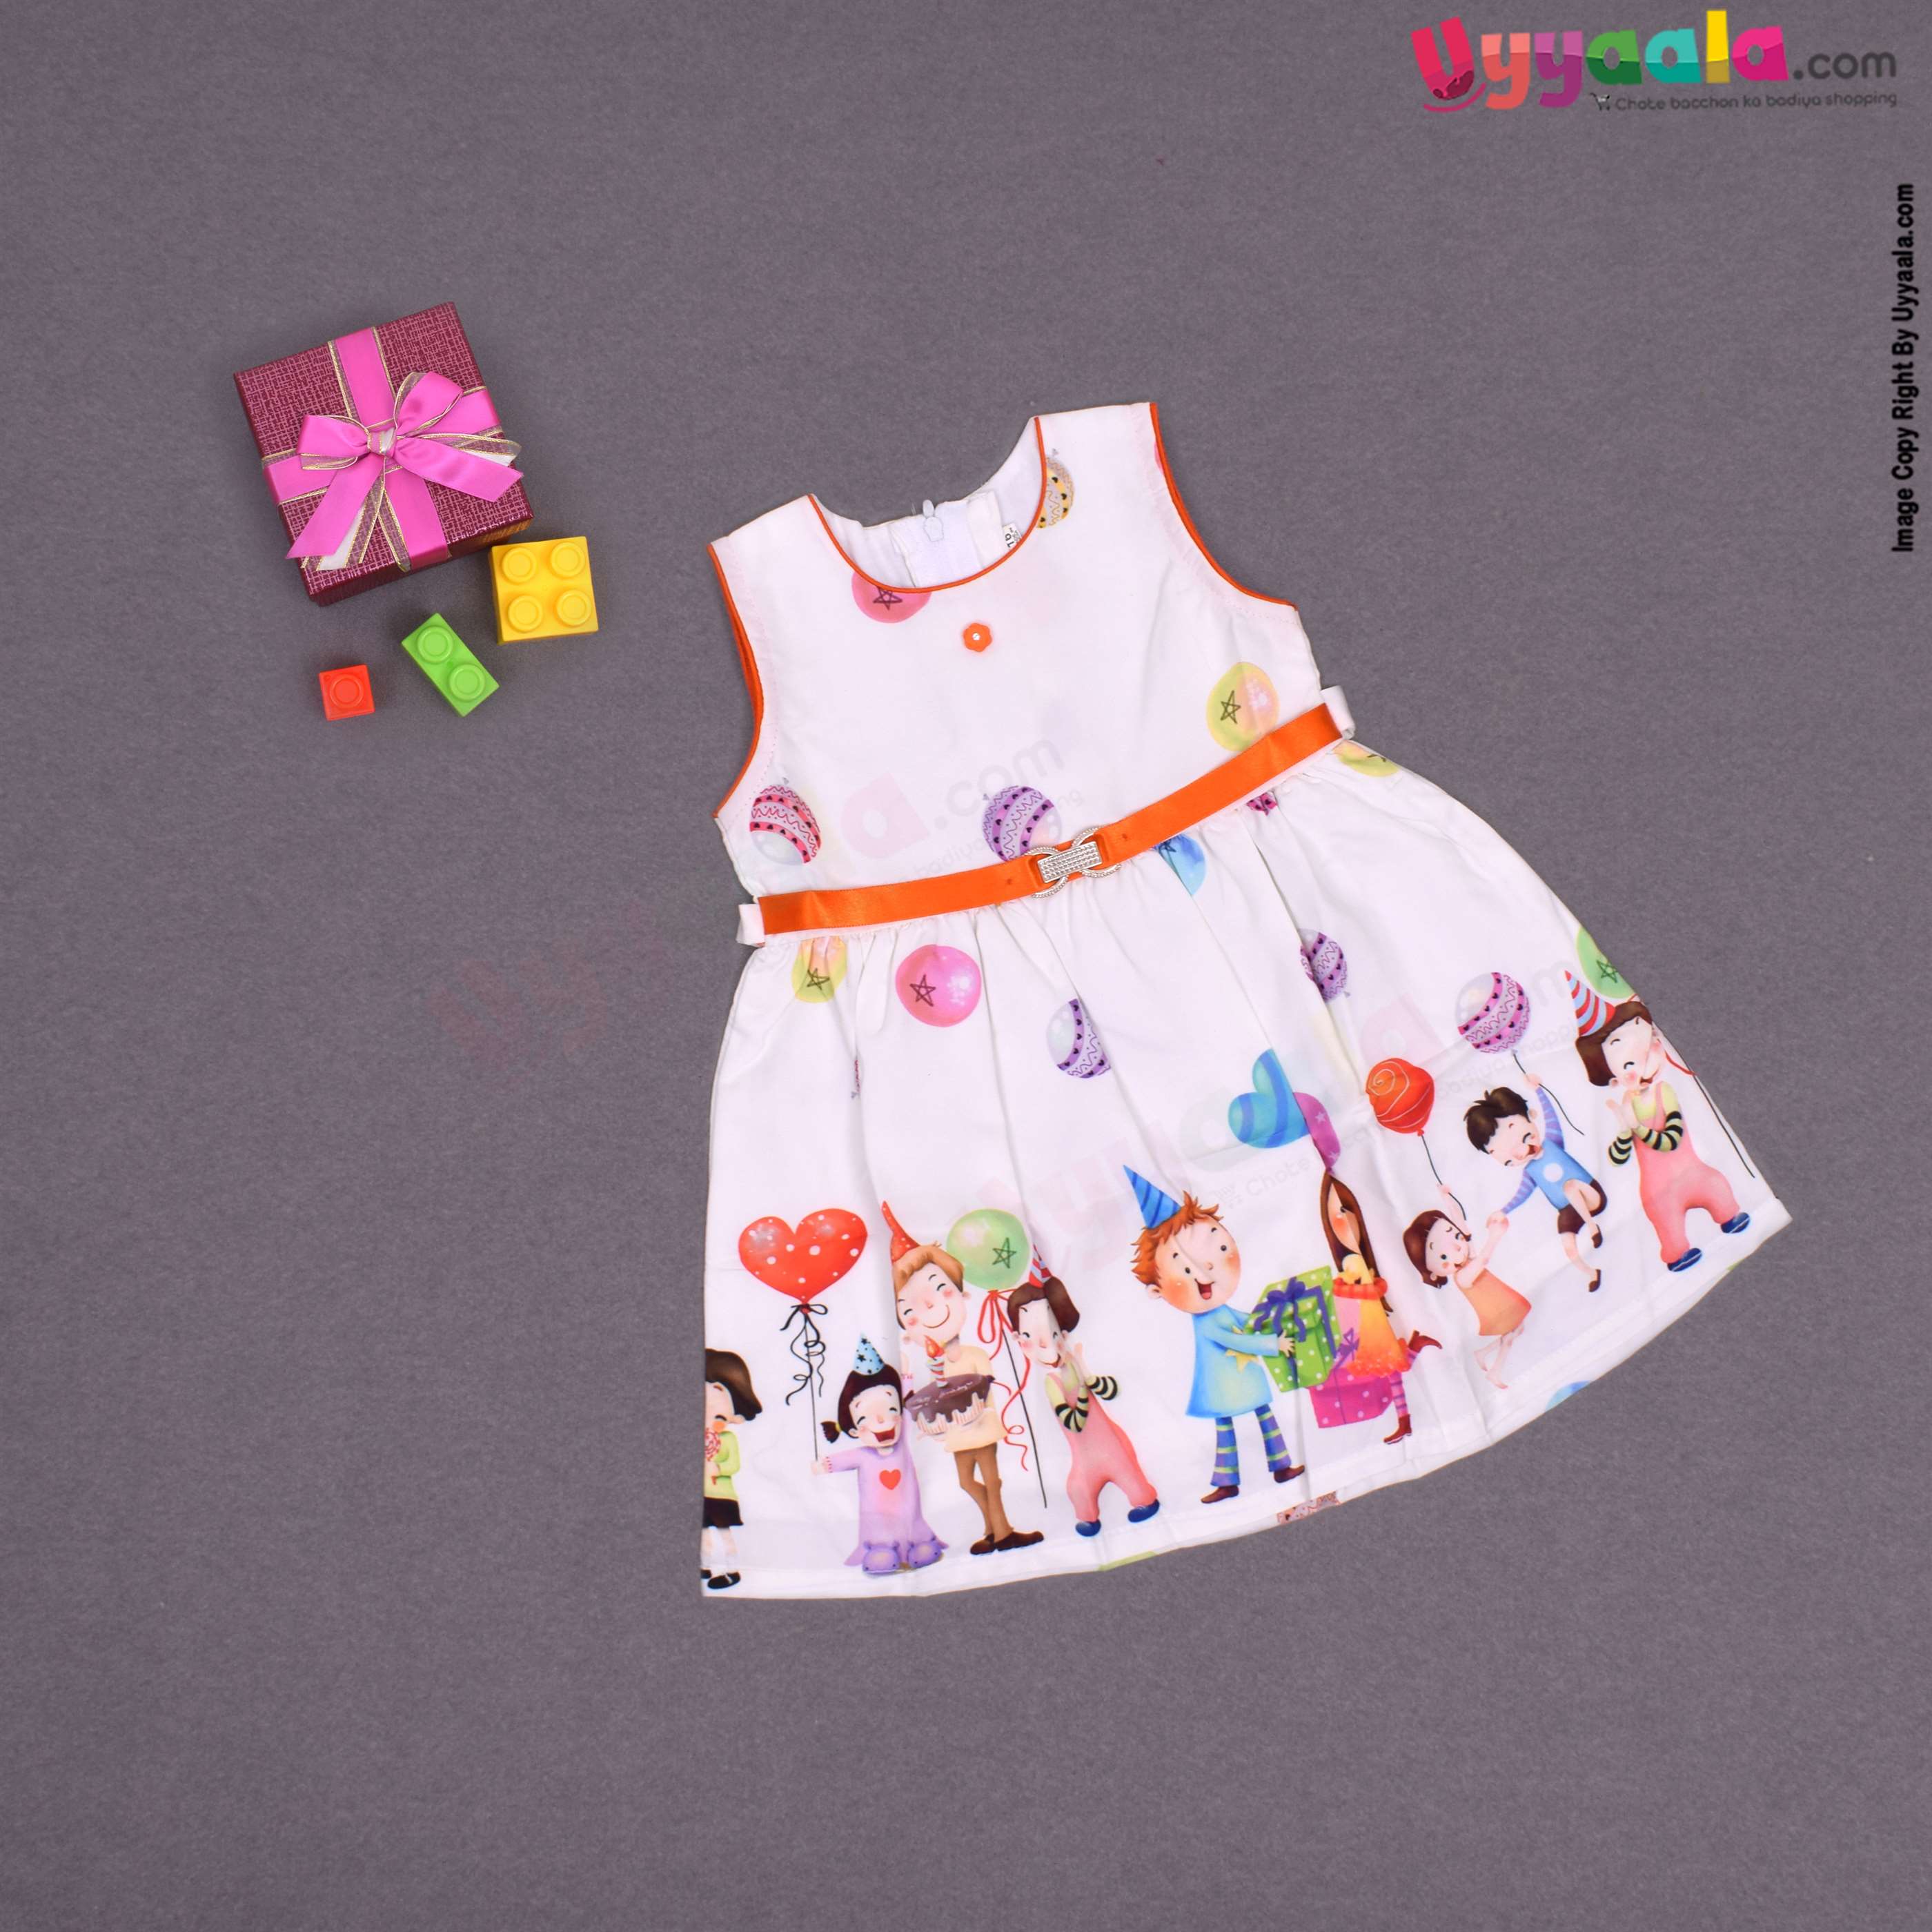 Cotton sleeveless party wear frock for baby girl